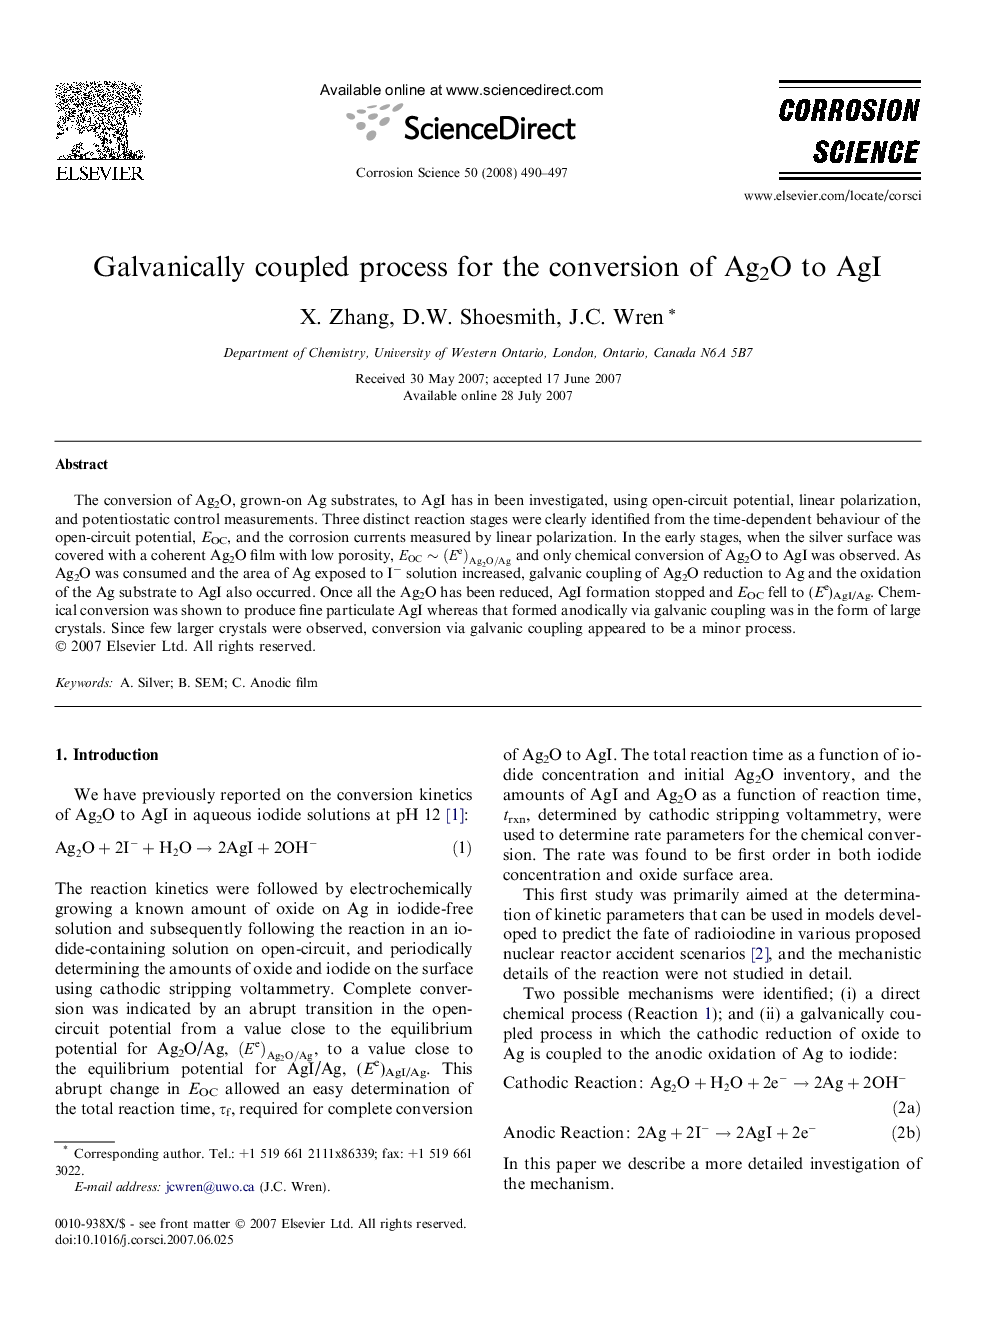 Galvanically coupled process for the conversion of Ag2O to AgI